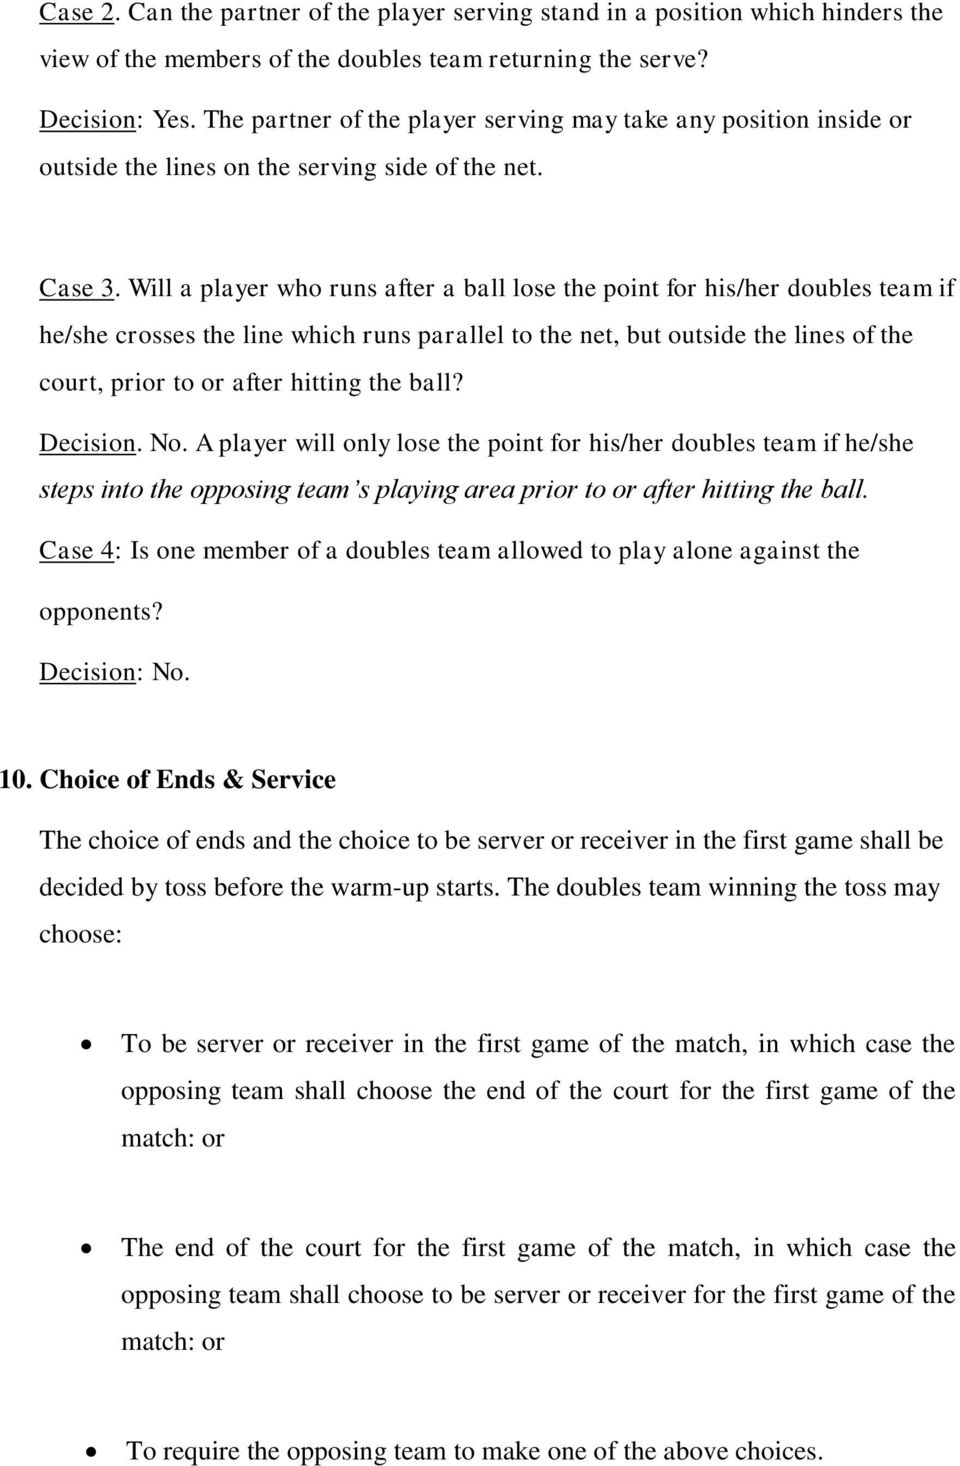 Will a player who runs after a ball lose the point for his/her doubles team if he/she crosses the line which runs parallel to the net, but outside the lines of the court, prior to or after hitting